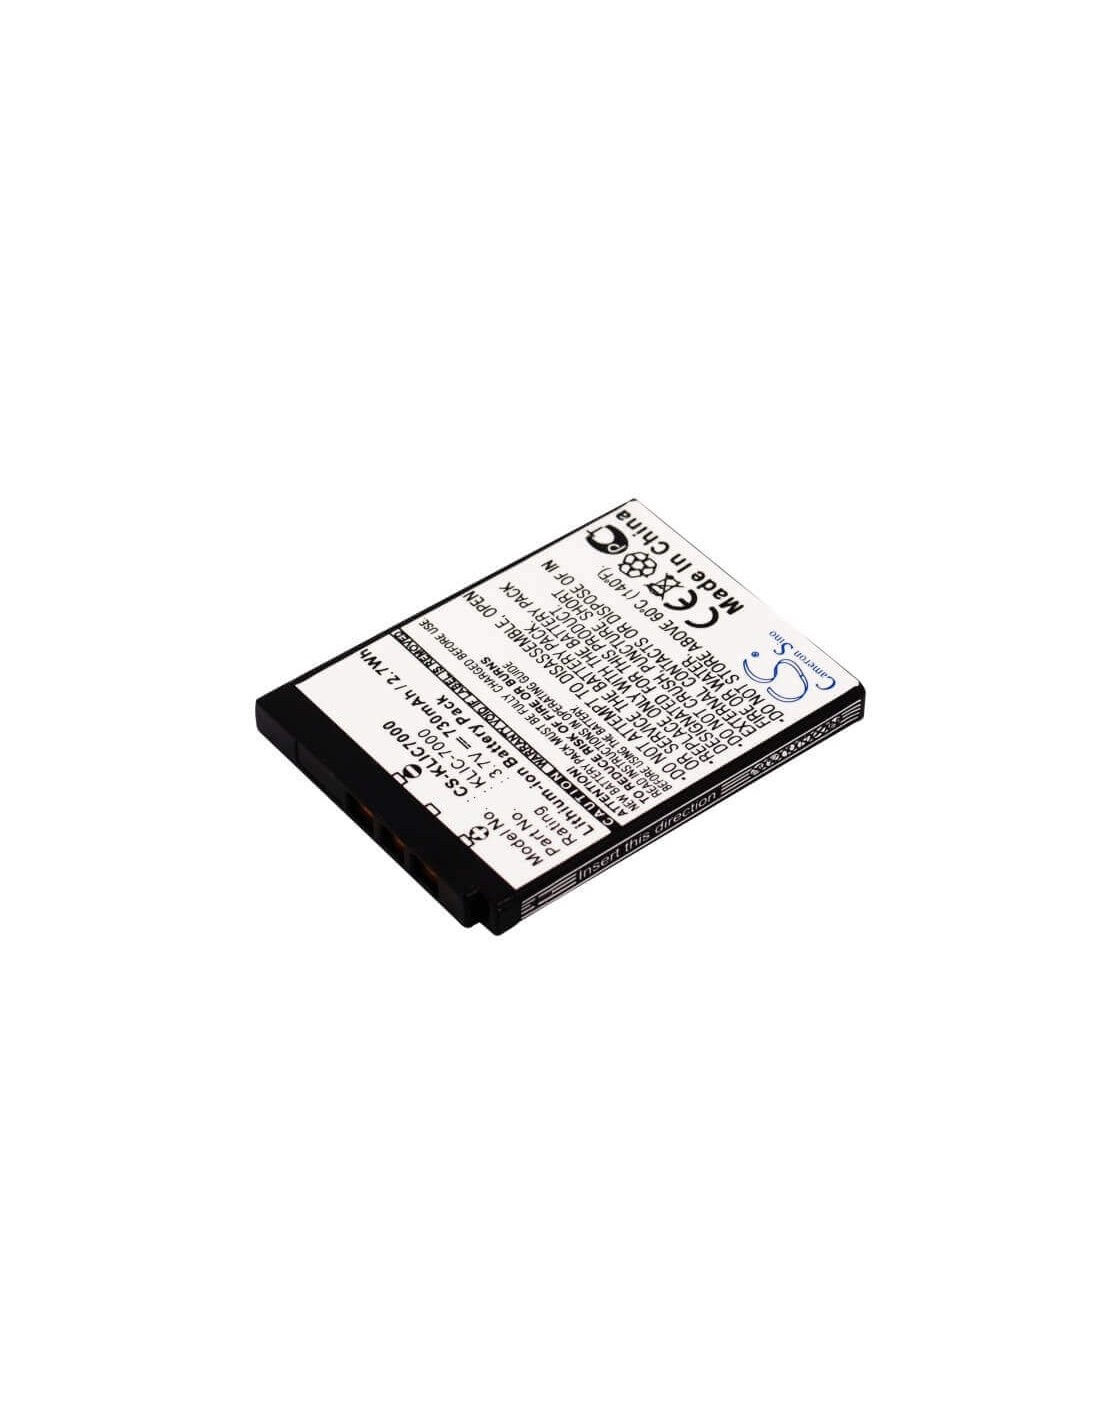 Battery for Ordro Dc-t200, Oucca, Dc-a1200, Dc-t300, 3.7V, 730mAh - 2.70Wh